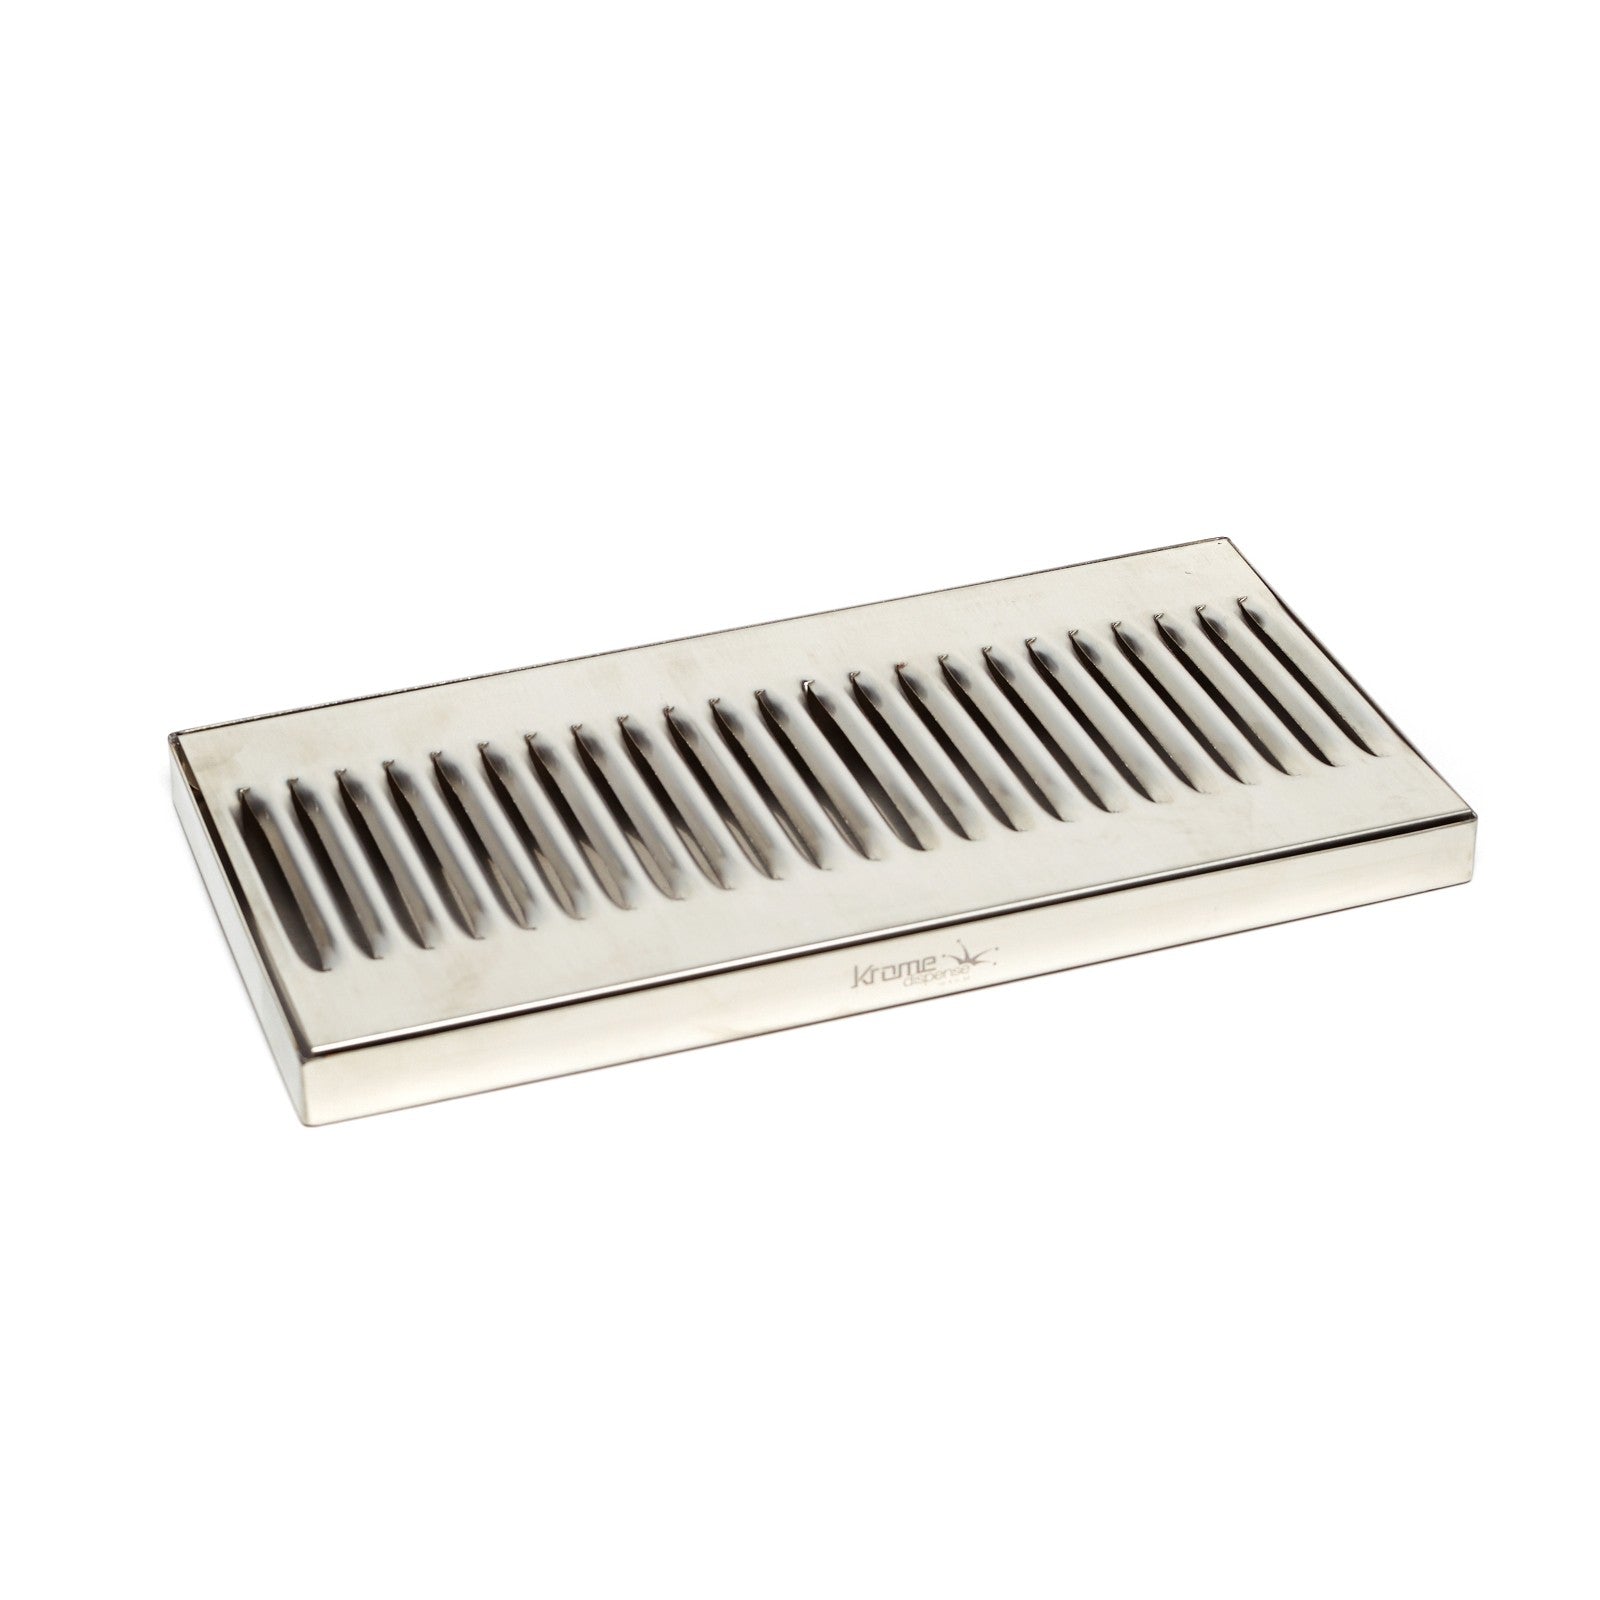 Rectangular Stainless Steel Drip Tray - All Things Fermented | Home Brew Shop NZ | Supplies | Equipment